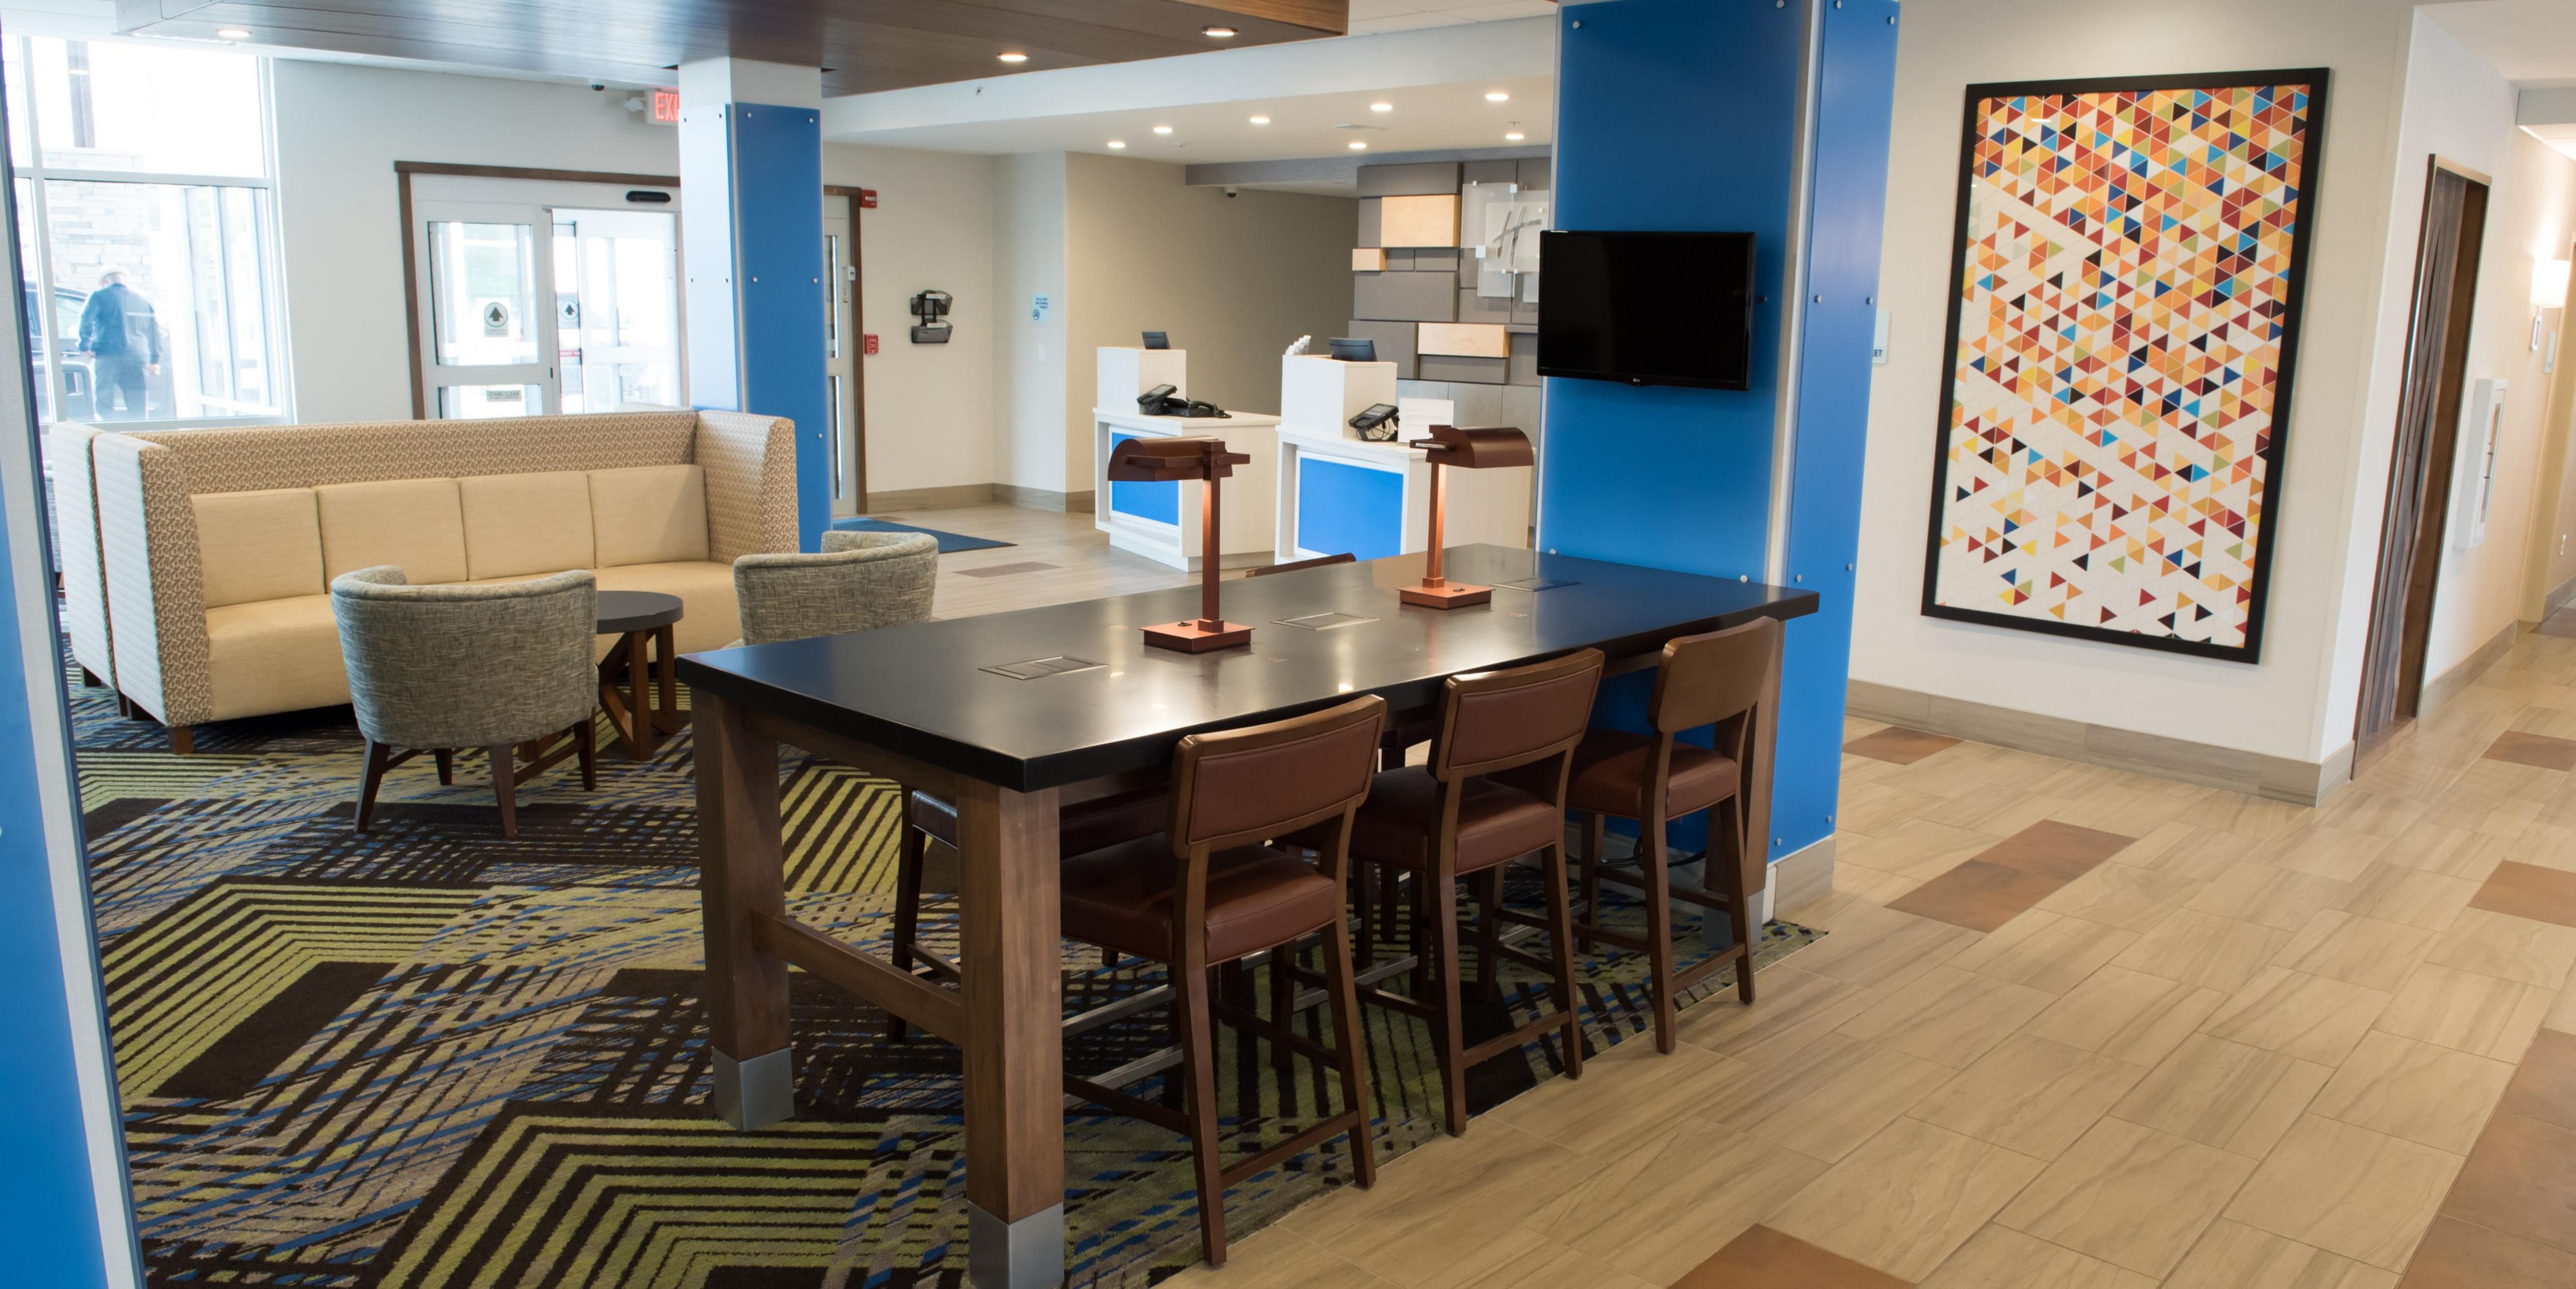 Participating in a local sports tournament?  Book your group with us and enjoy our beautiful new hotel that is conveniently located near many sports venues. 